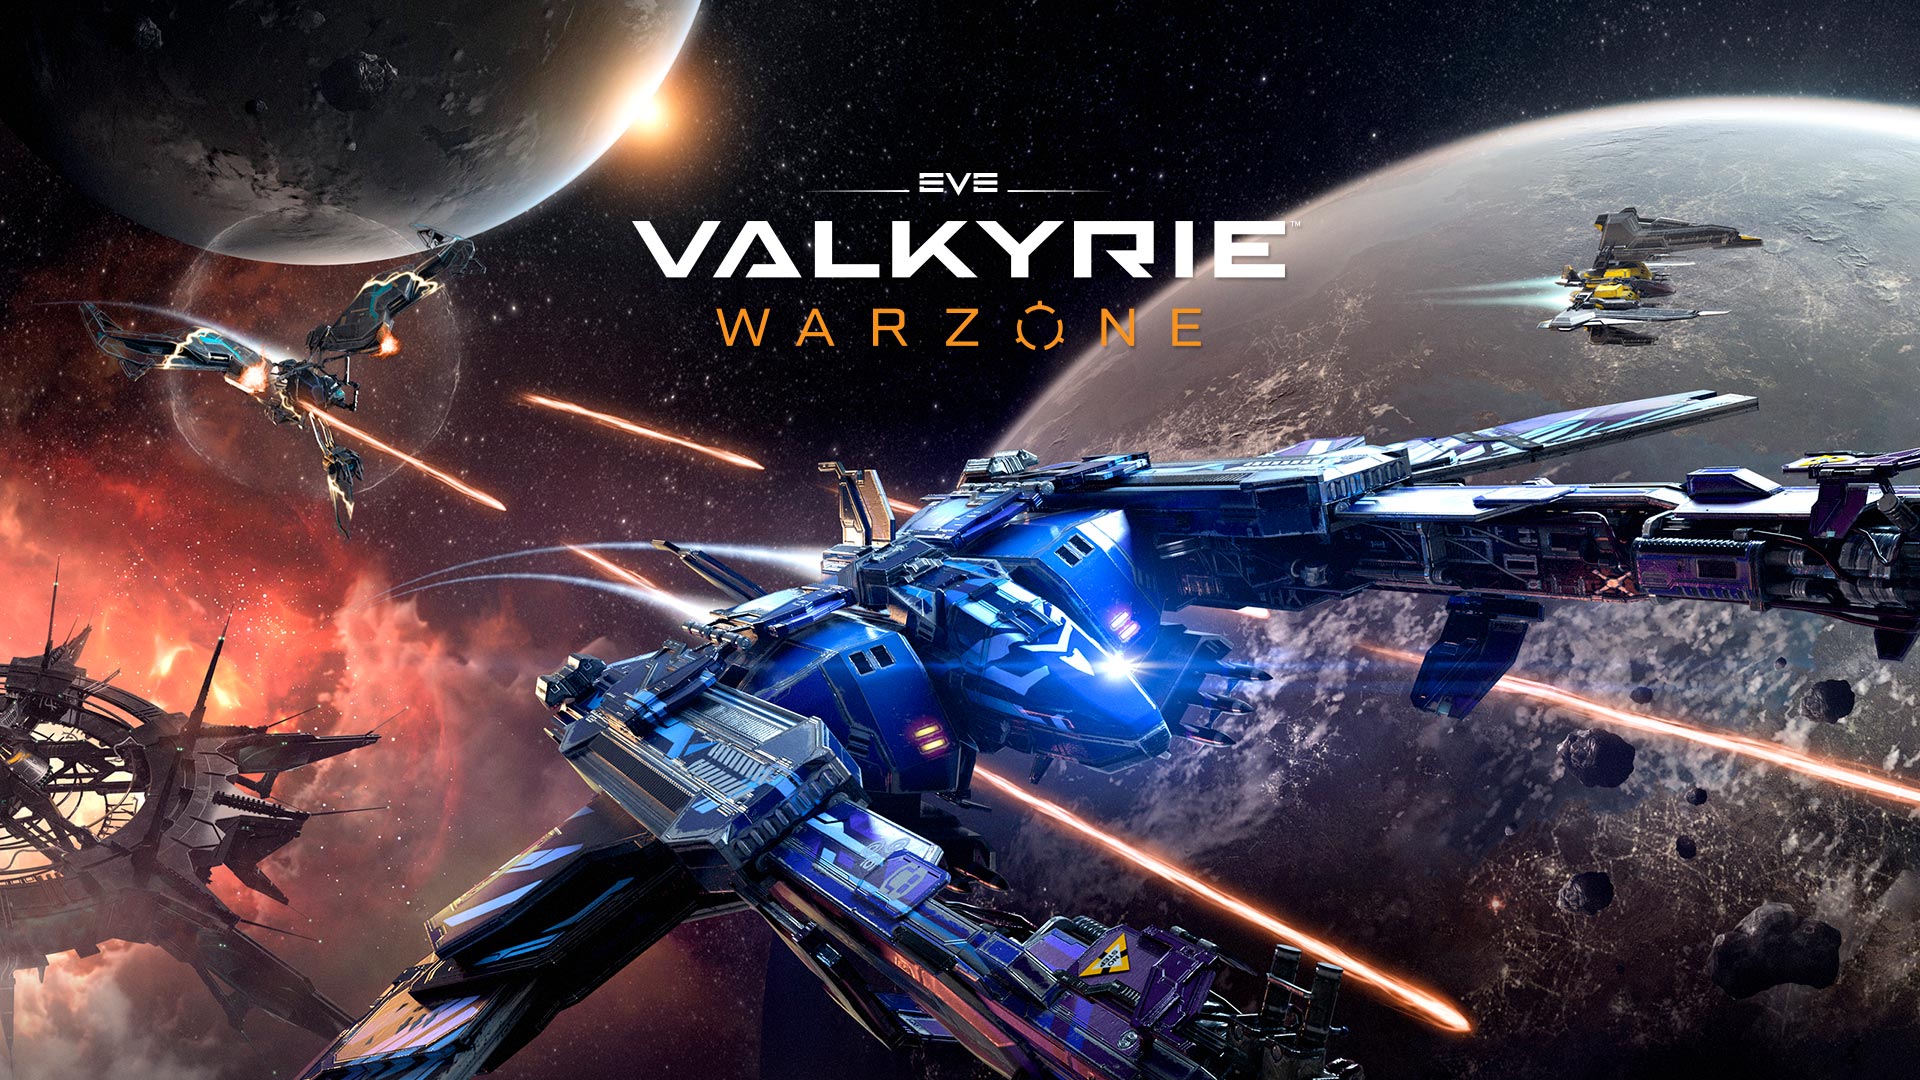 CCP Games Launches EVE: Valkyrie Warzone, First Fully Cross-Platform, Cross-Reality Videogame for VR, PC and PlayStation 4 - CCP Games